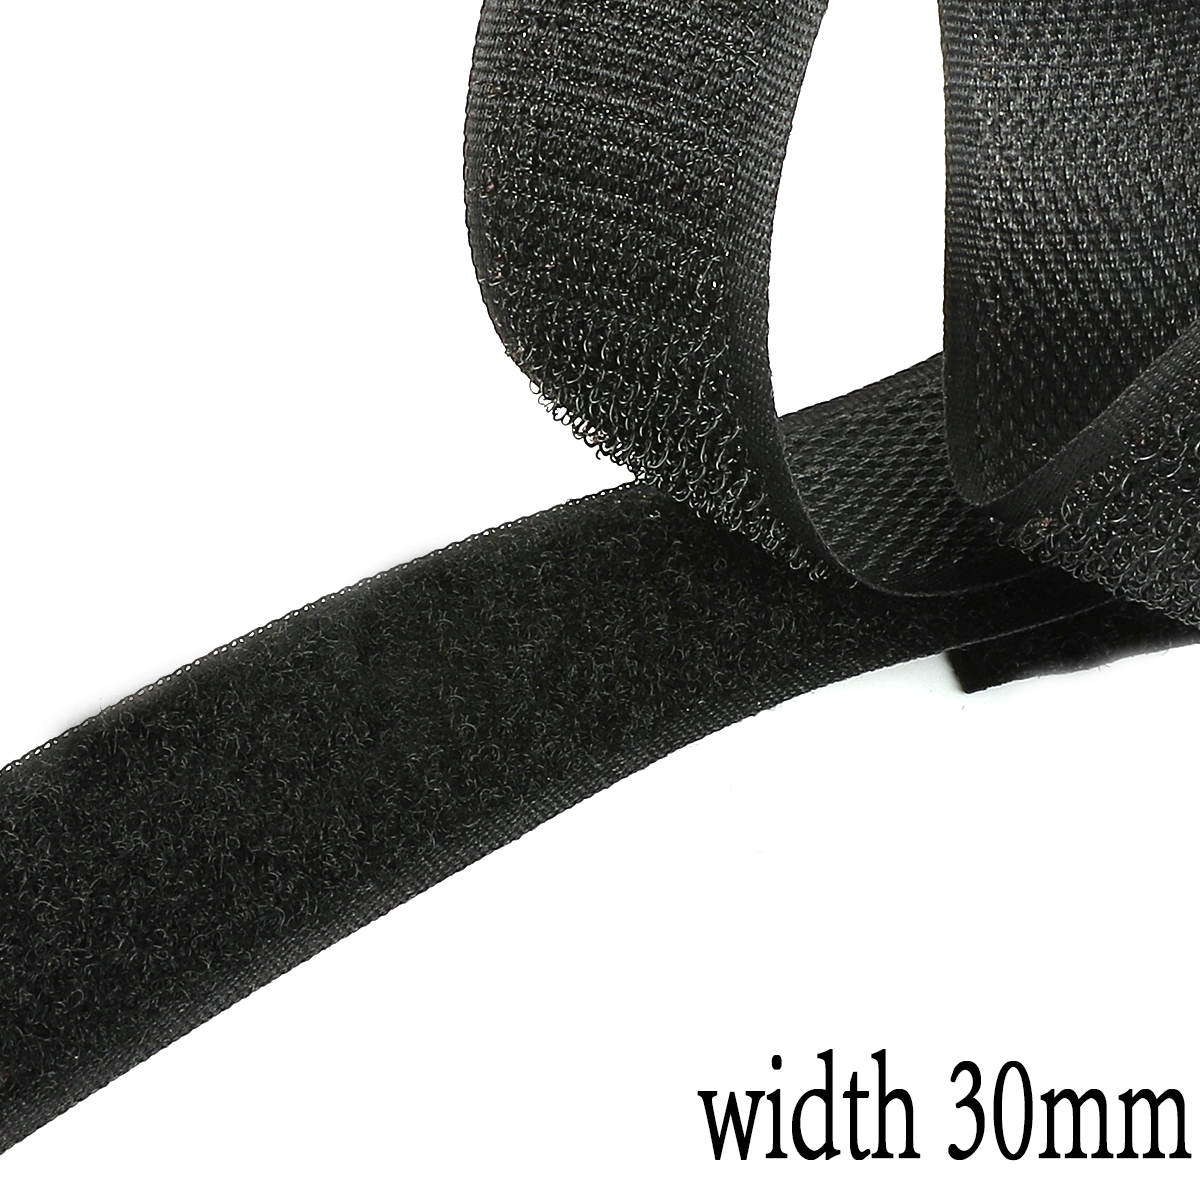 2M 16-40mm Black Not Adhesive Hook and Loop Fastener Tape Sticker Velcros Nylon Magic Tape for DIY Craft Supply Roll Sew On Tape: Black 30mm width